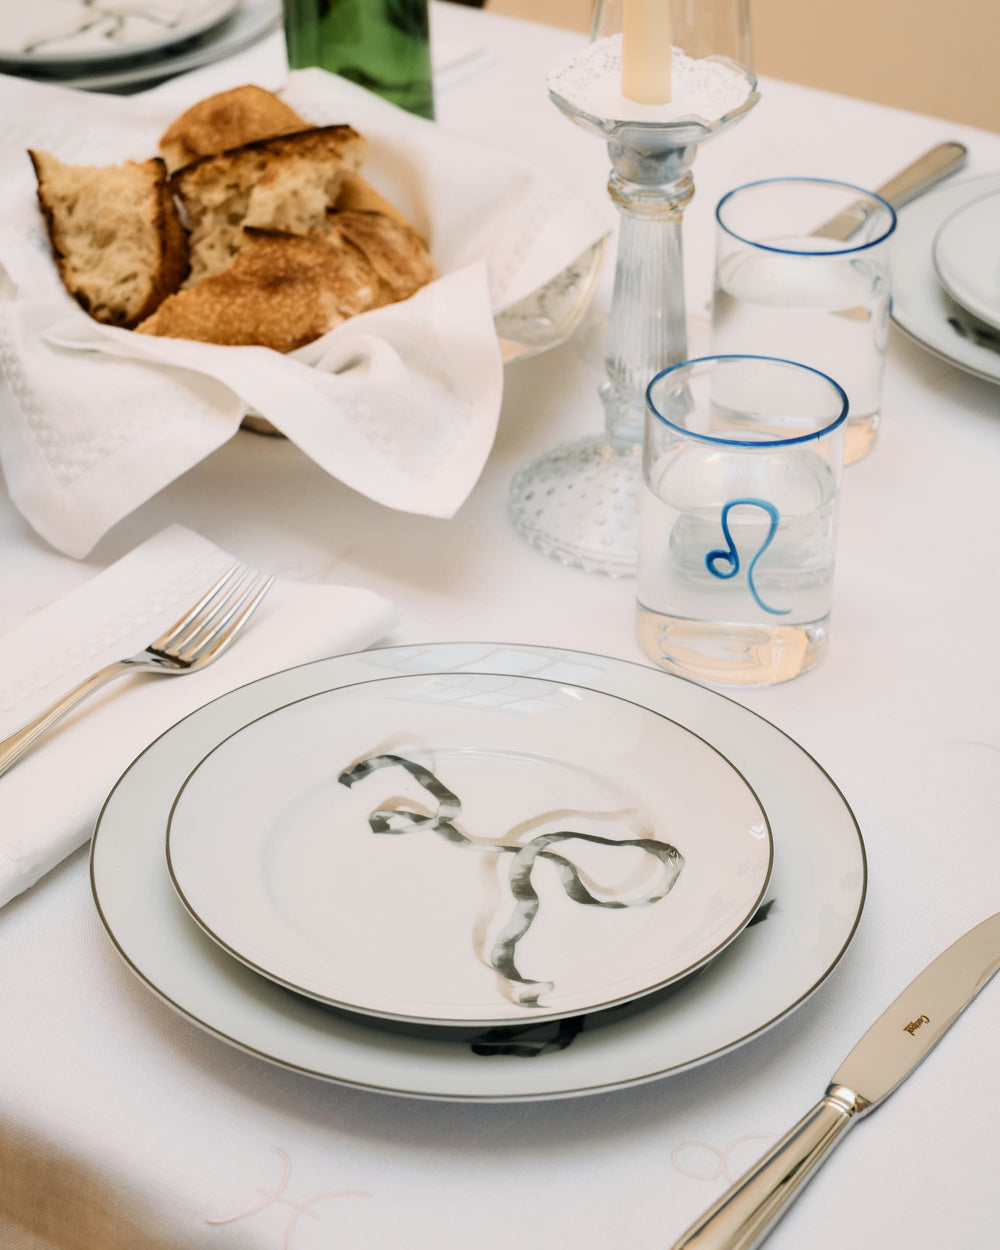 A salad plate with a black ribbon placed atop a matching dinner plate. To the left, a neatly folded white napkin lies under a silver fork, and to the right, a silver knife with a refined design. In the background, transparent hand-blown glass with cobalt blue rim and Leo astrology sign. The overall setting exudes a sense of quiet elegance.